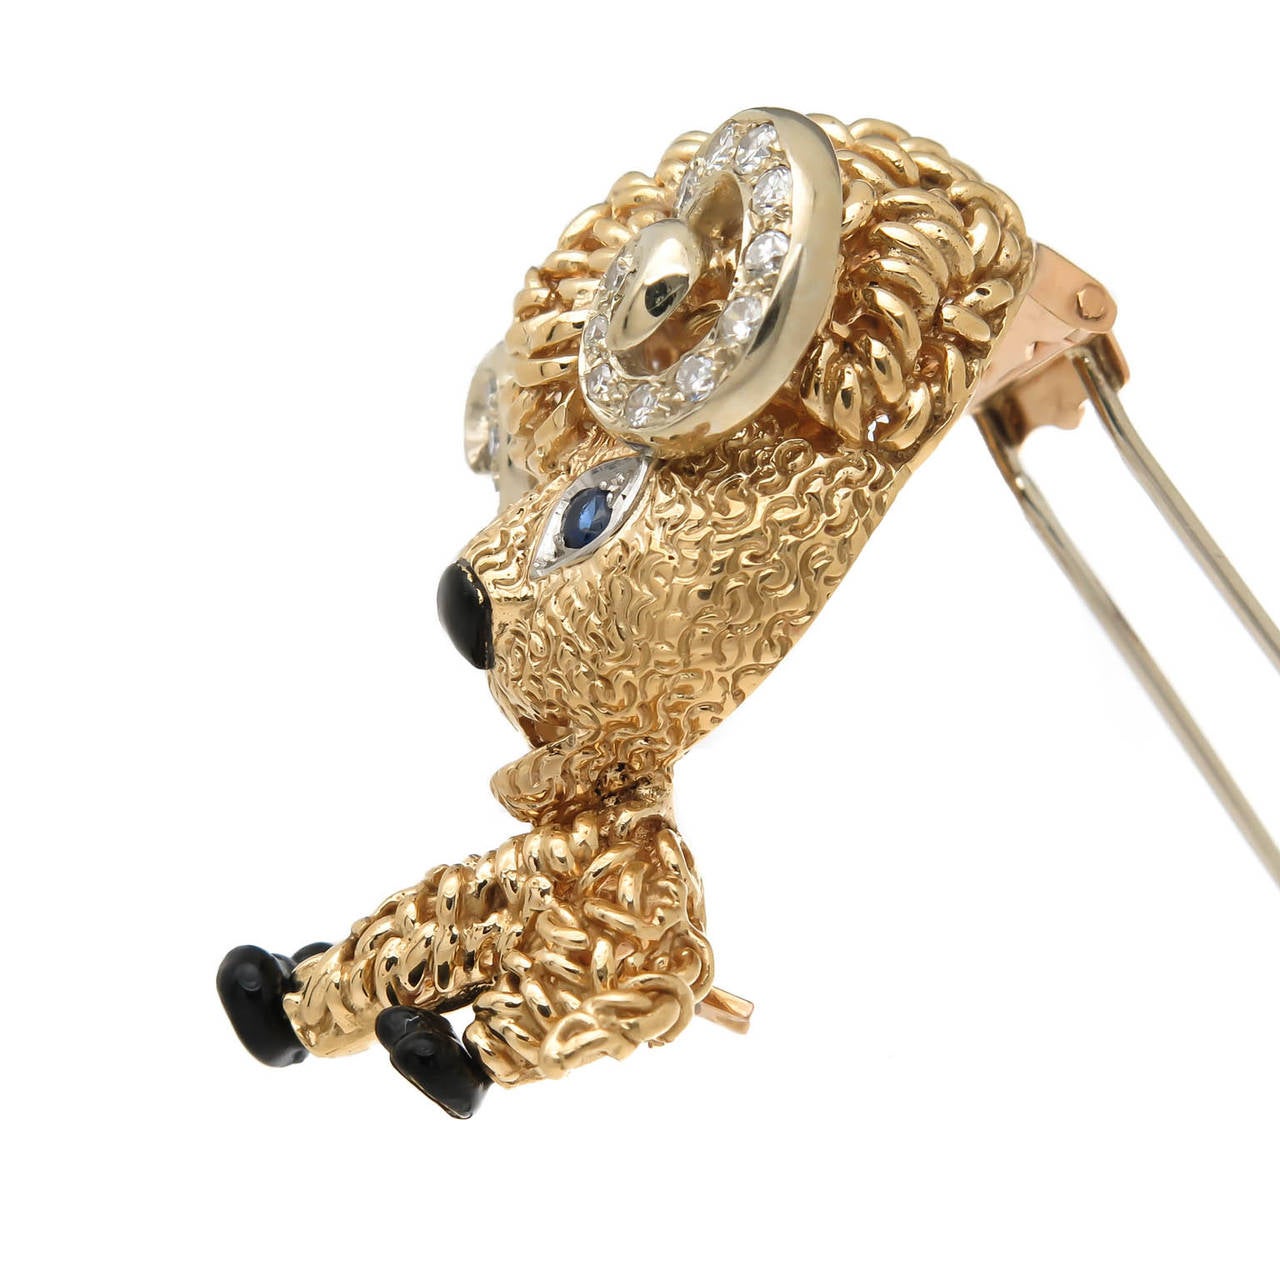 Circa 1980 Van Cleef and Arpels 18K yellow gold ram brooch, very whimsical young ram, set with diamonds and sapphires and further accented in black enamel. Having a double pin-clip back, signed, numbered and having French hallmarks.